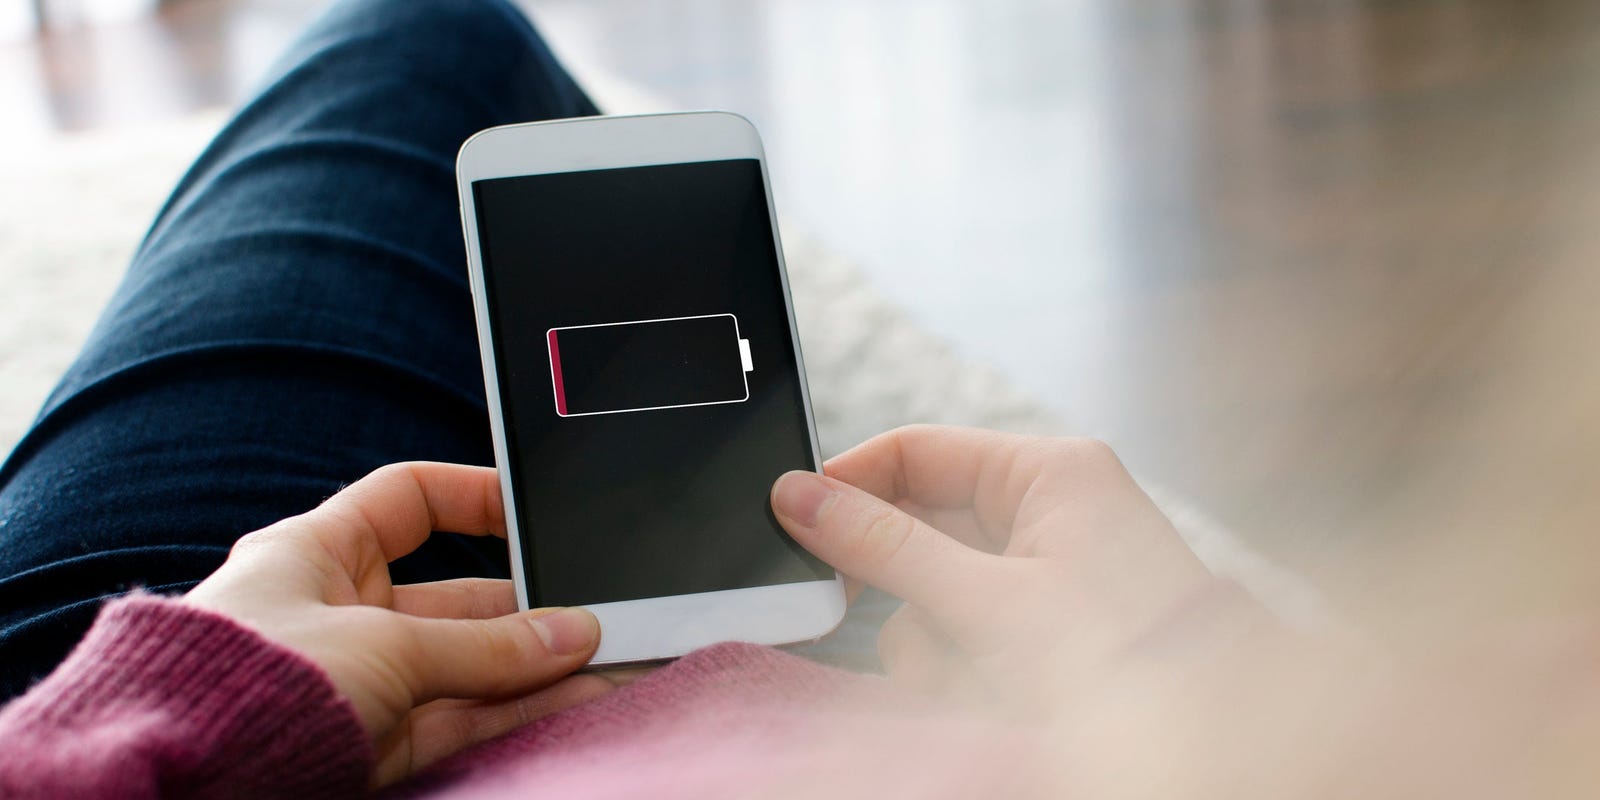 Cell phone battery draining: Tips to keep your device running longer